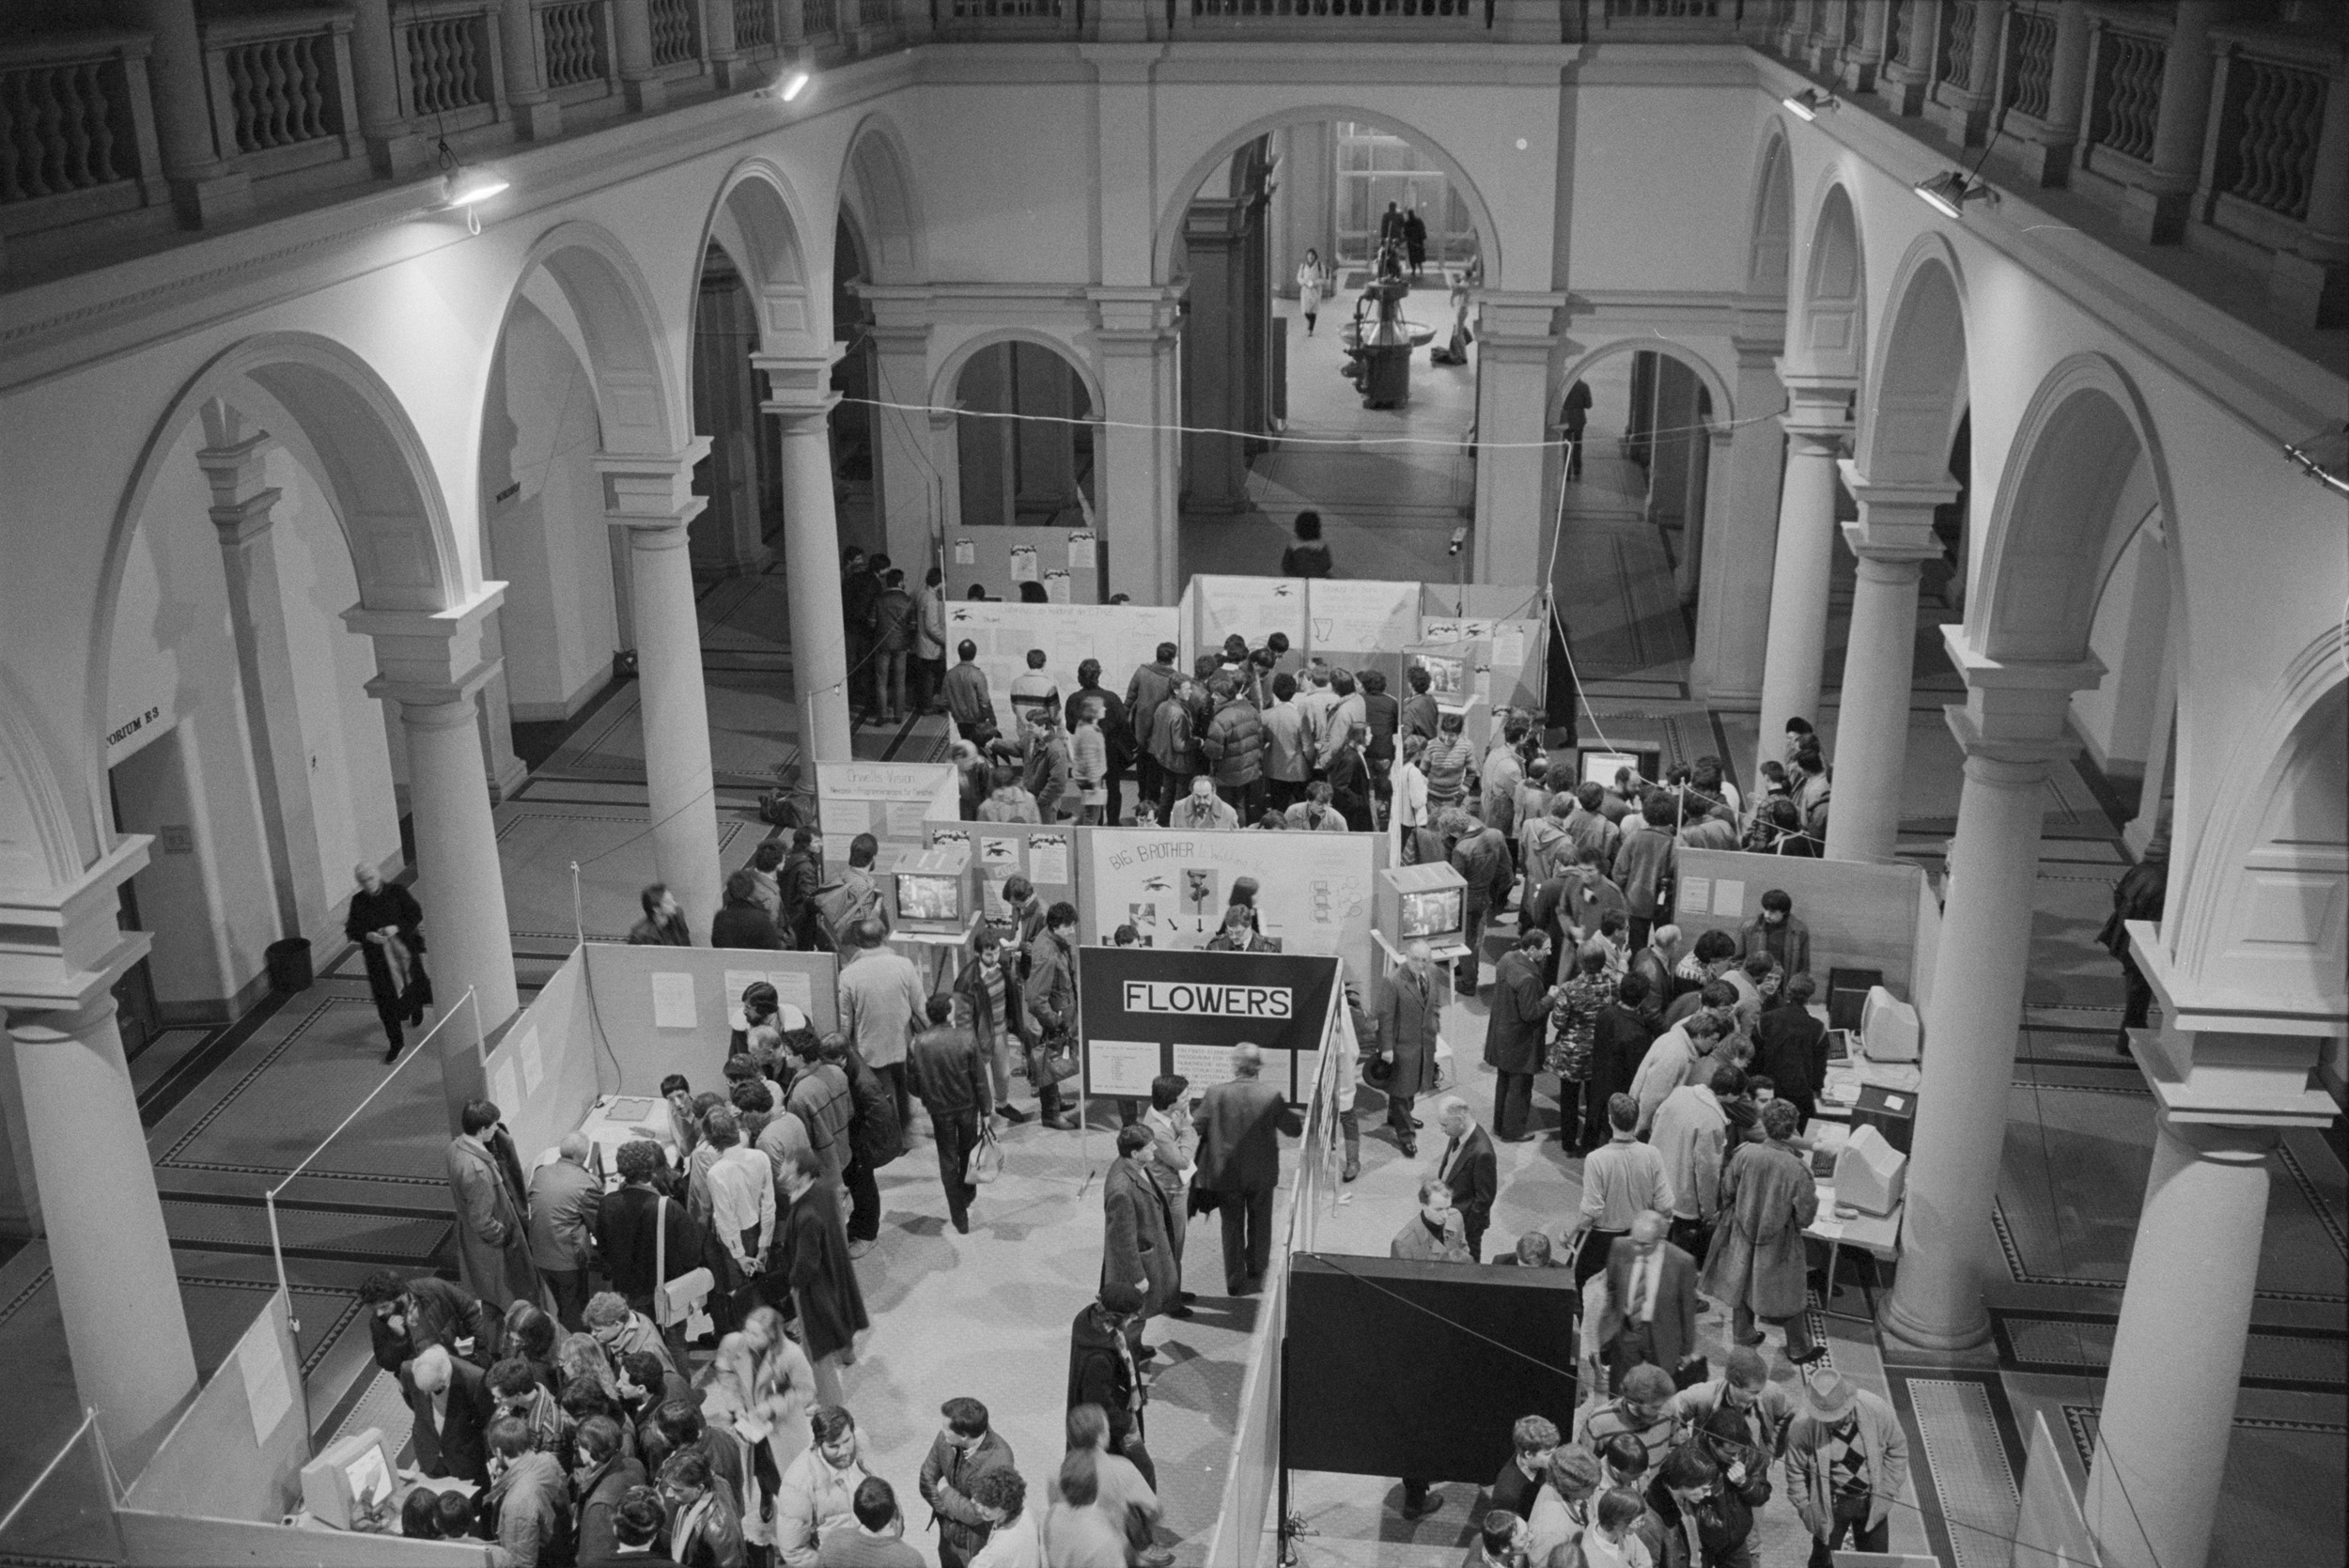 Enlarged view: Black and white photo of the main hall of ETH Zurich's main building, taken from the first-floor gallery. The hall is full of exhibition booths and people in winter clothing.